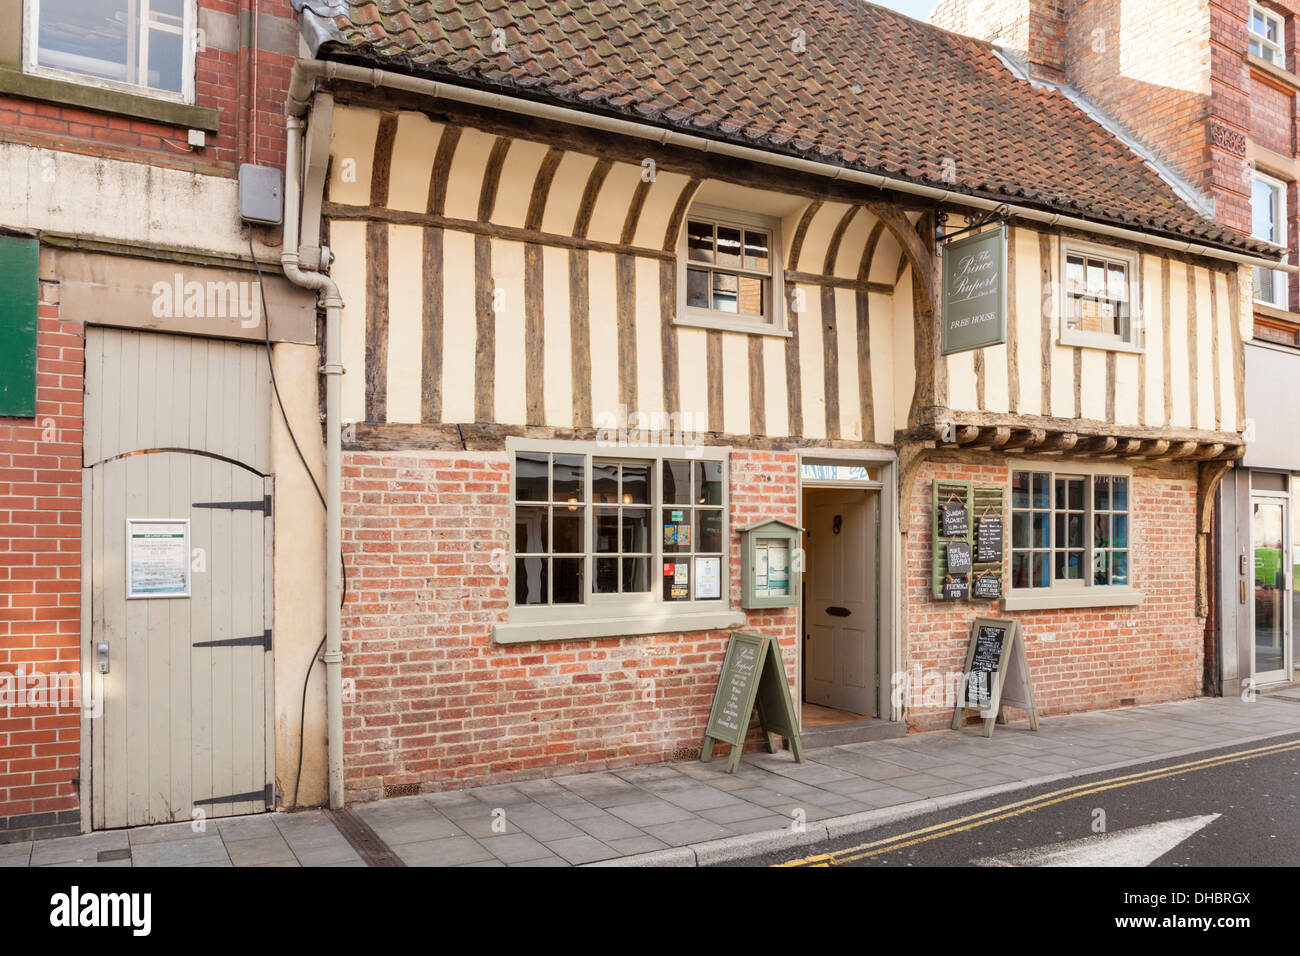 Old pubs. The old half timbered Prince Rupert public house, a 15th century pub in Newark on Trent, Nottinghamshire, England, UK Stock Photo